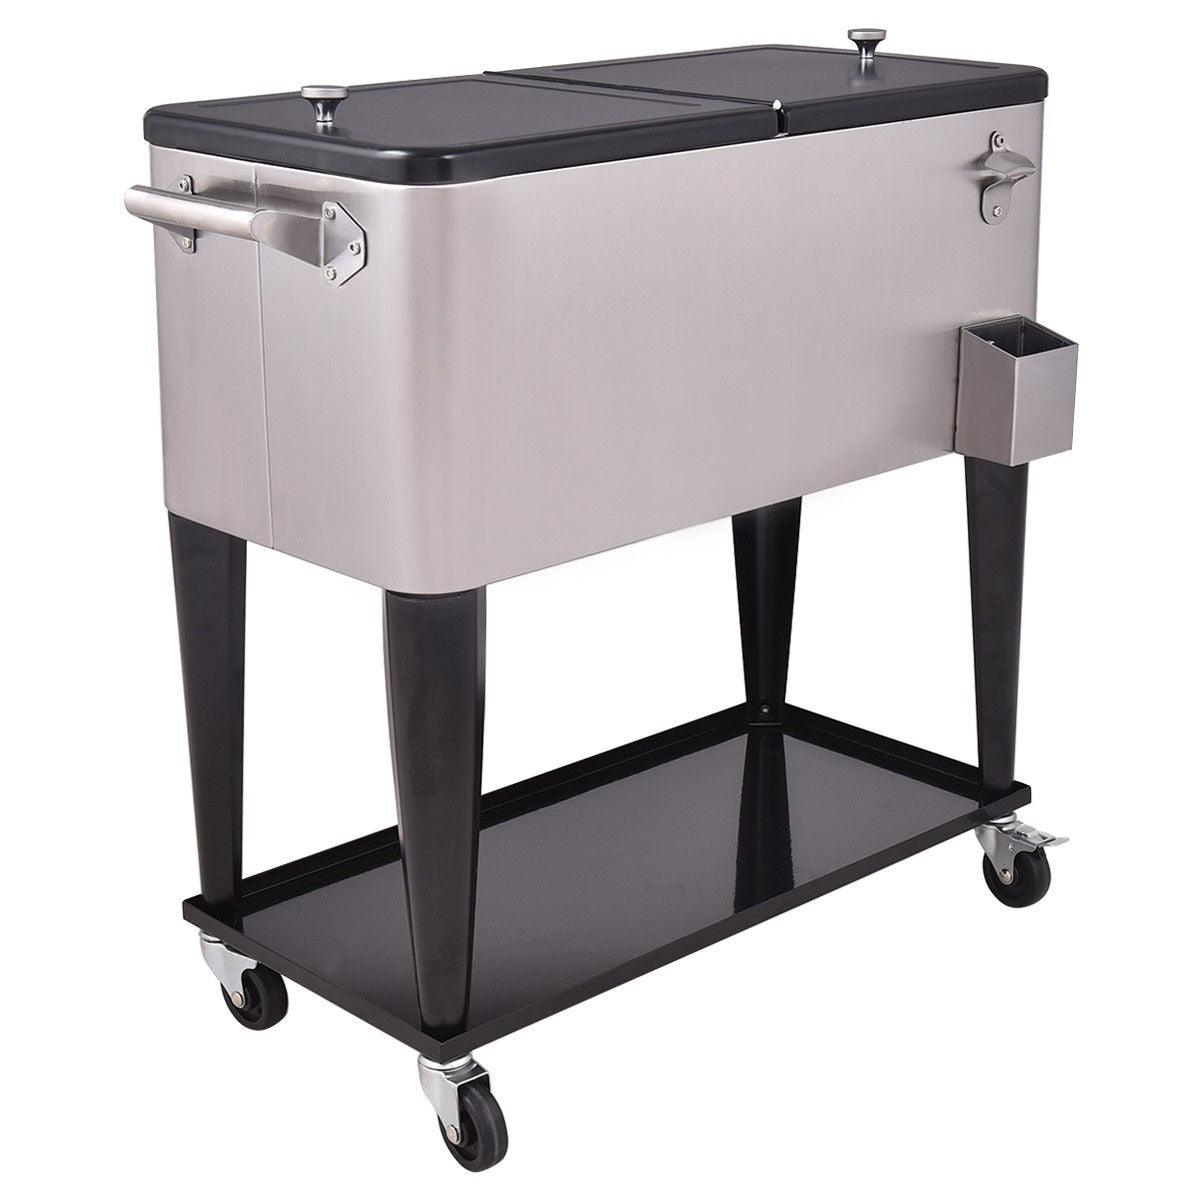 80 Quart Patio Rolling Stainless Steel Ice Beverage Cooler 36902714 - YOURISHOP.COM